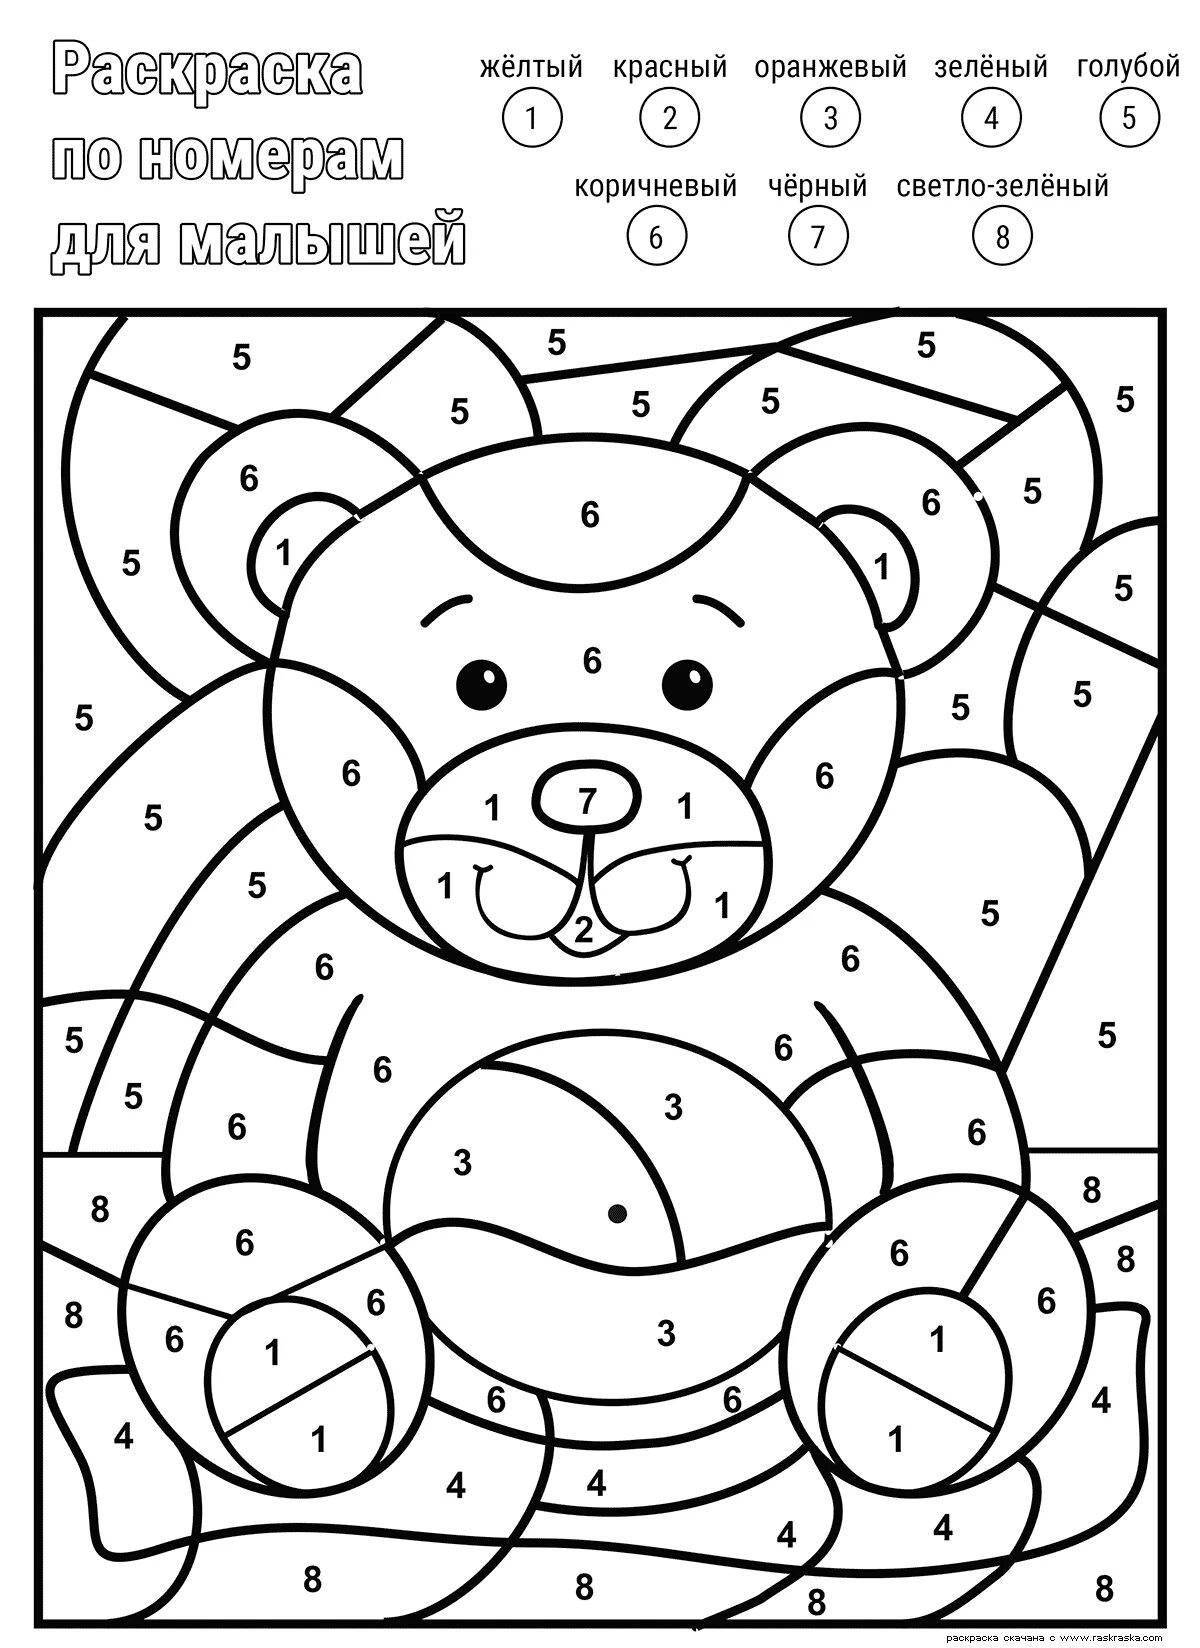 Fun coloring by number pdf